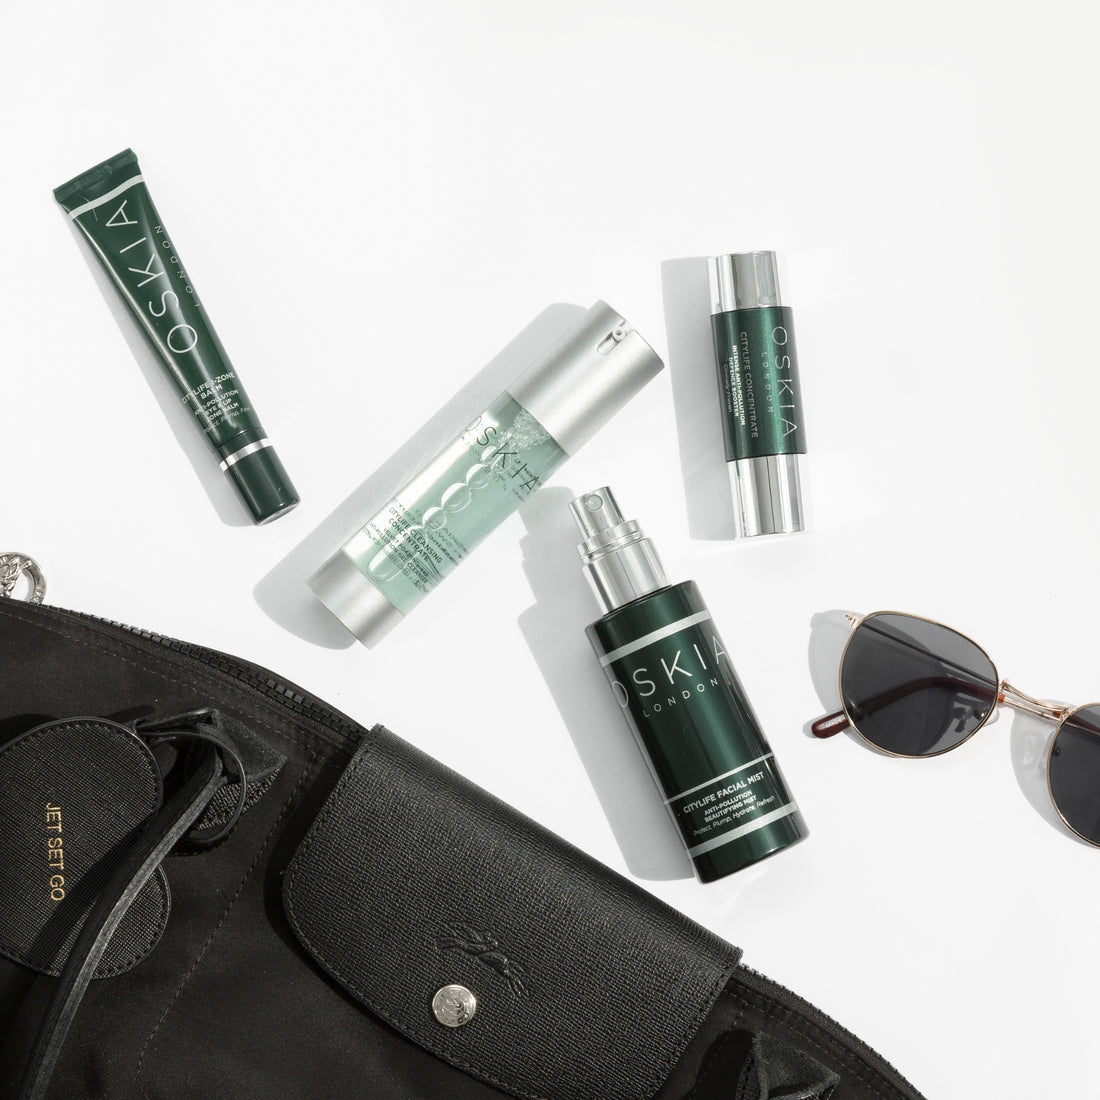 What ingredients are in our Citylife anti-pollution range?